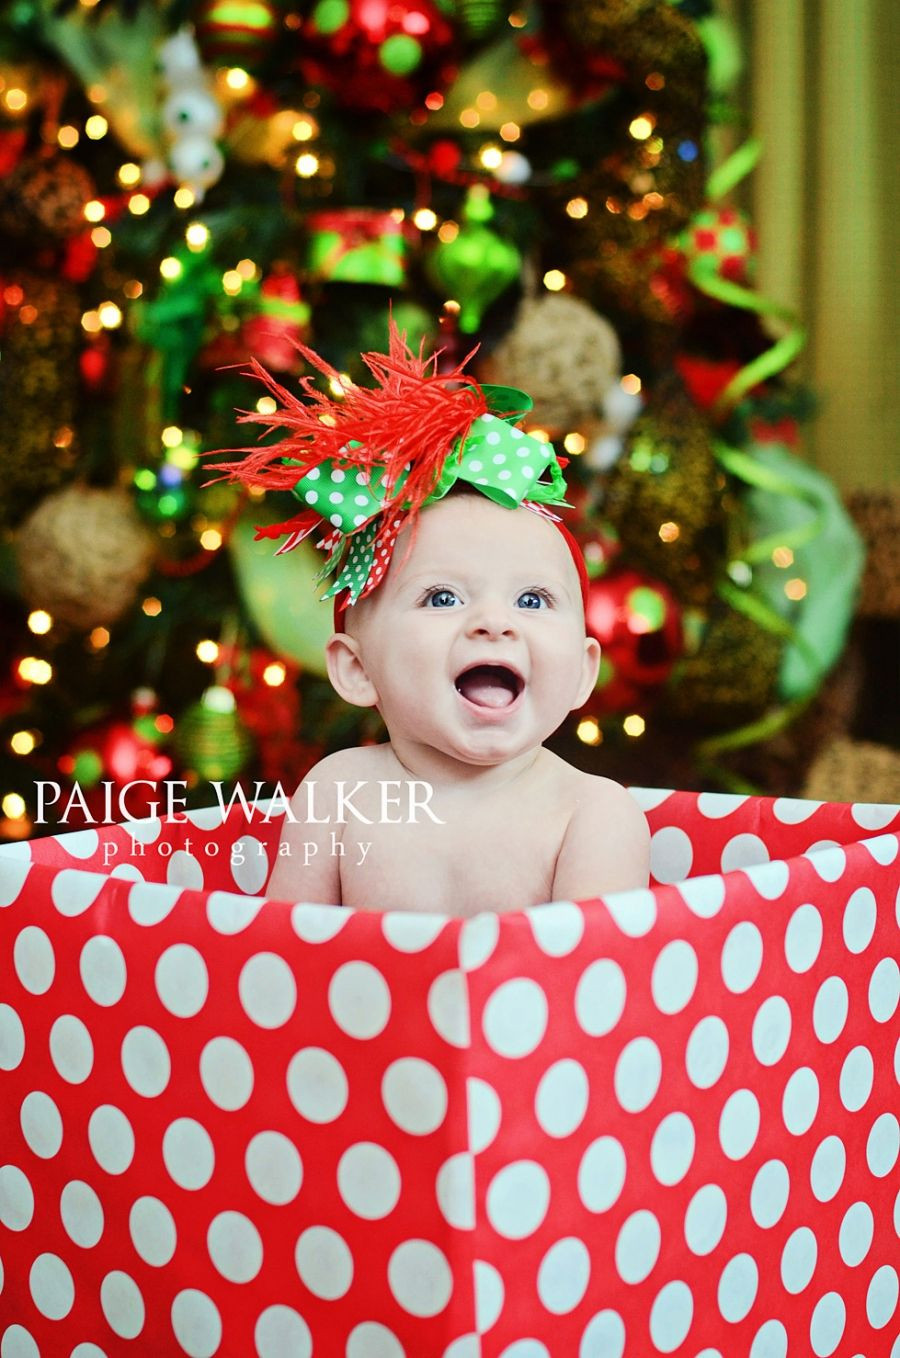 Christmas Gift Ideas For 6 Month Baby Girl
 Cute baby Christmas photo This would be so cute with the